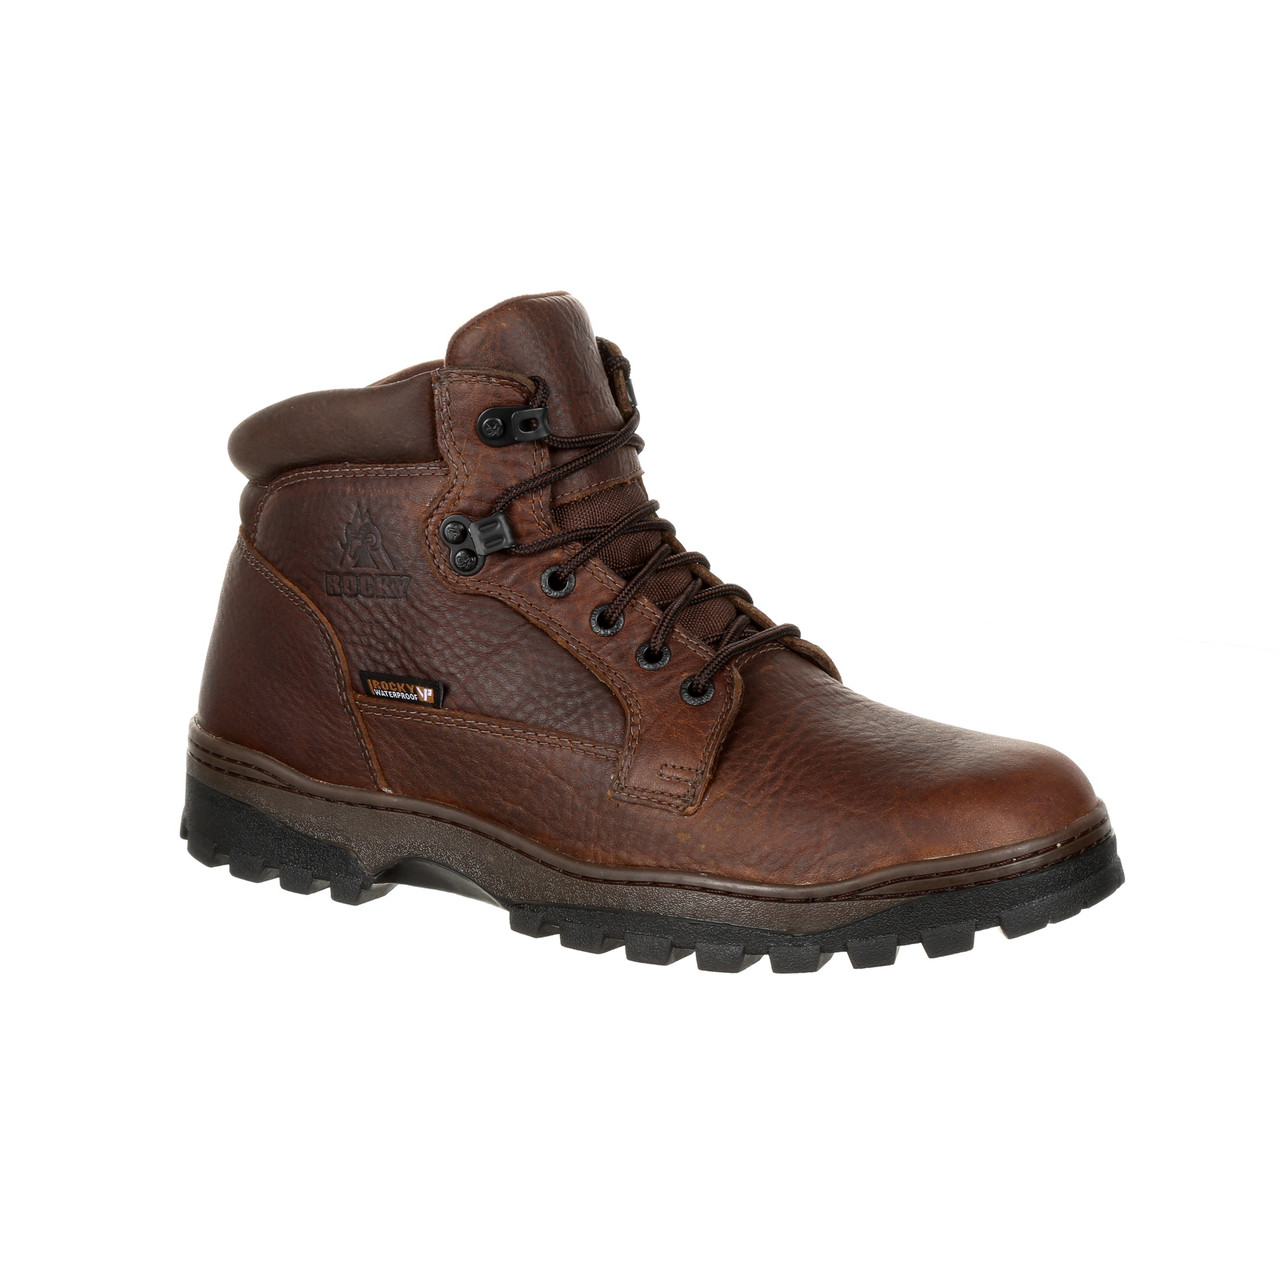 ROCKY OUTBACK PLAIN TOE GORE-TEX® WATERPROOF OUTDOOR BOOTS RKS0389